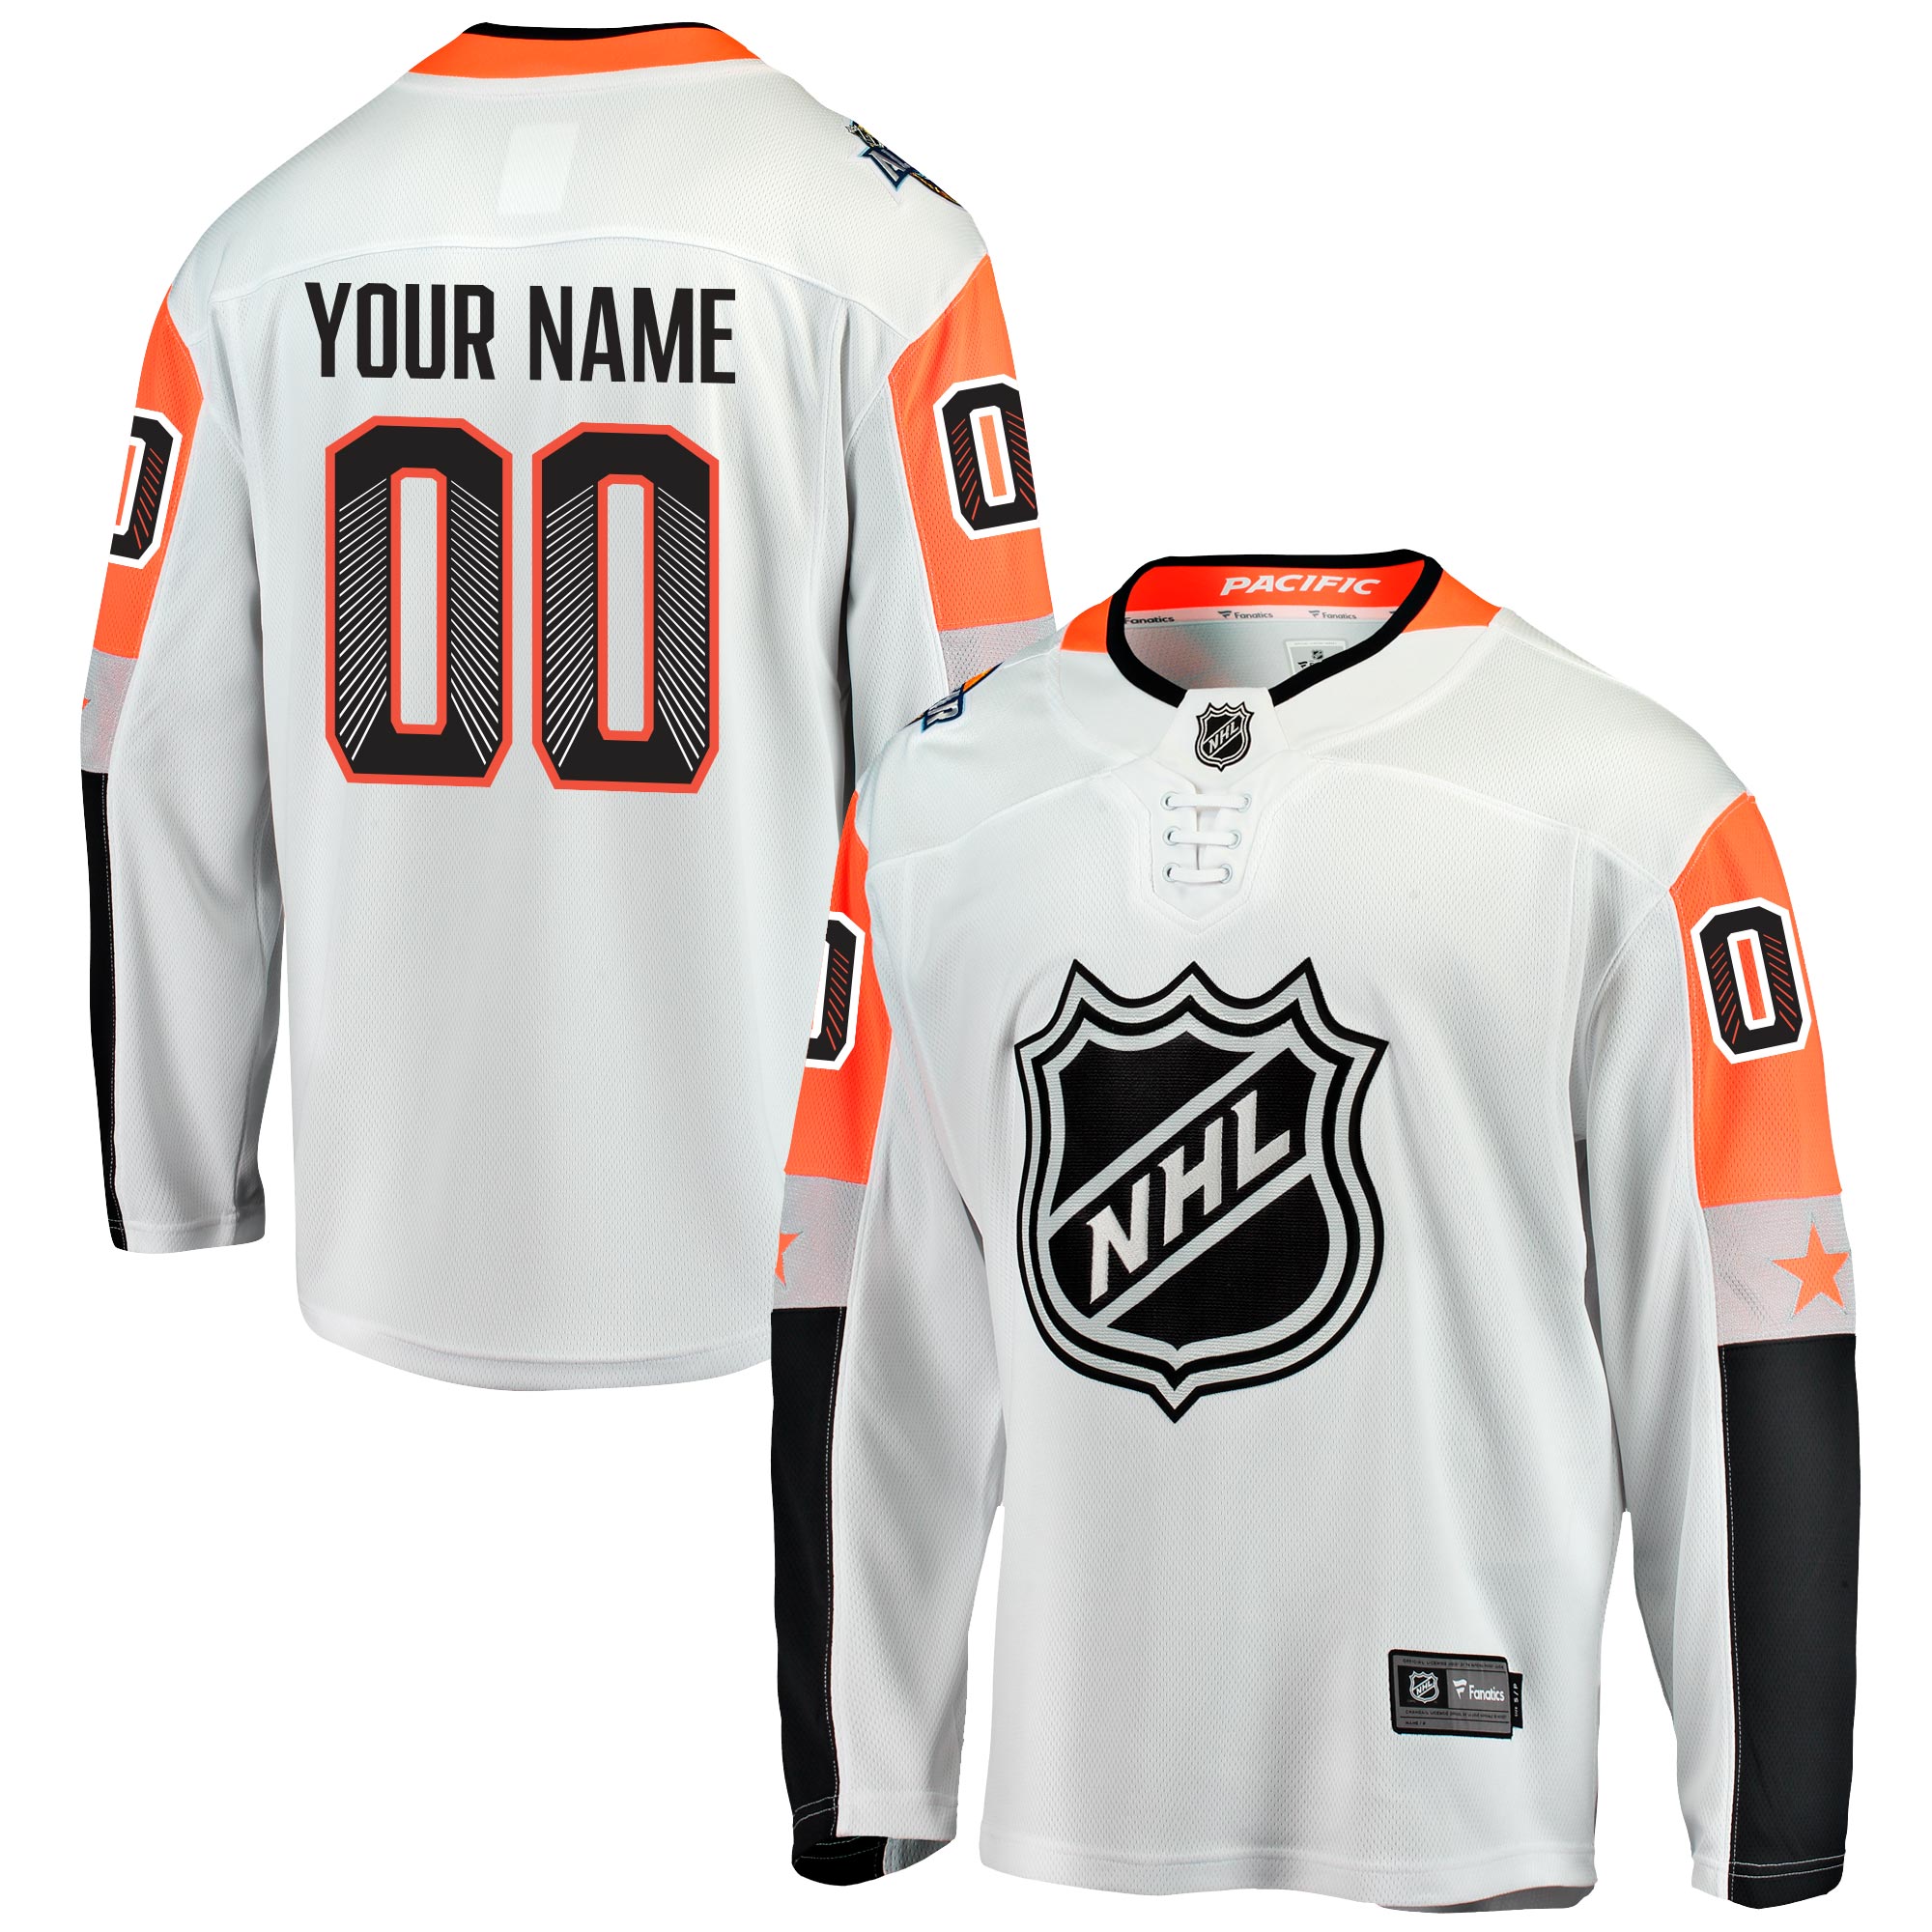 Mens NHL Pacific Division All Star Fanatics Branded Breakaway Jersey Customised->customized nhl jersey->Custom Jersey